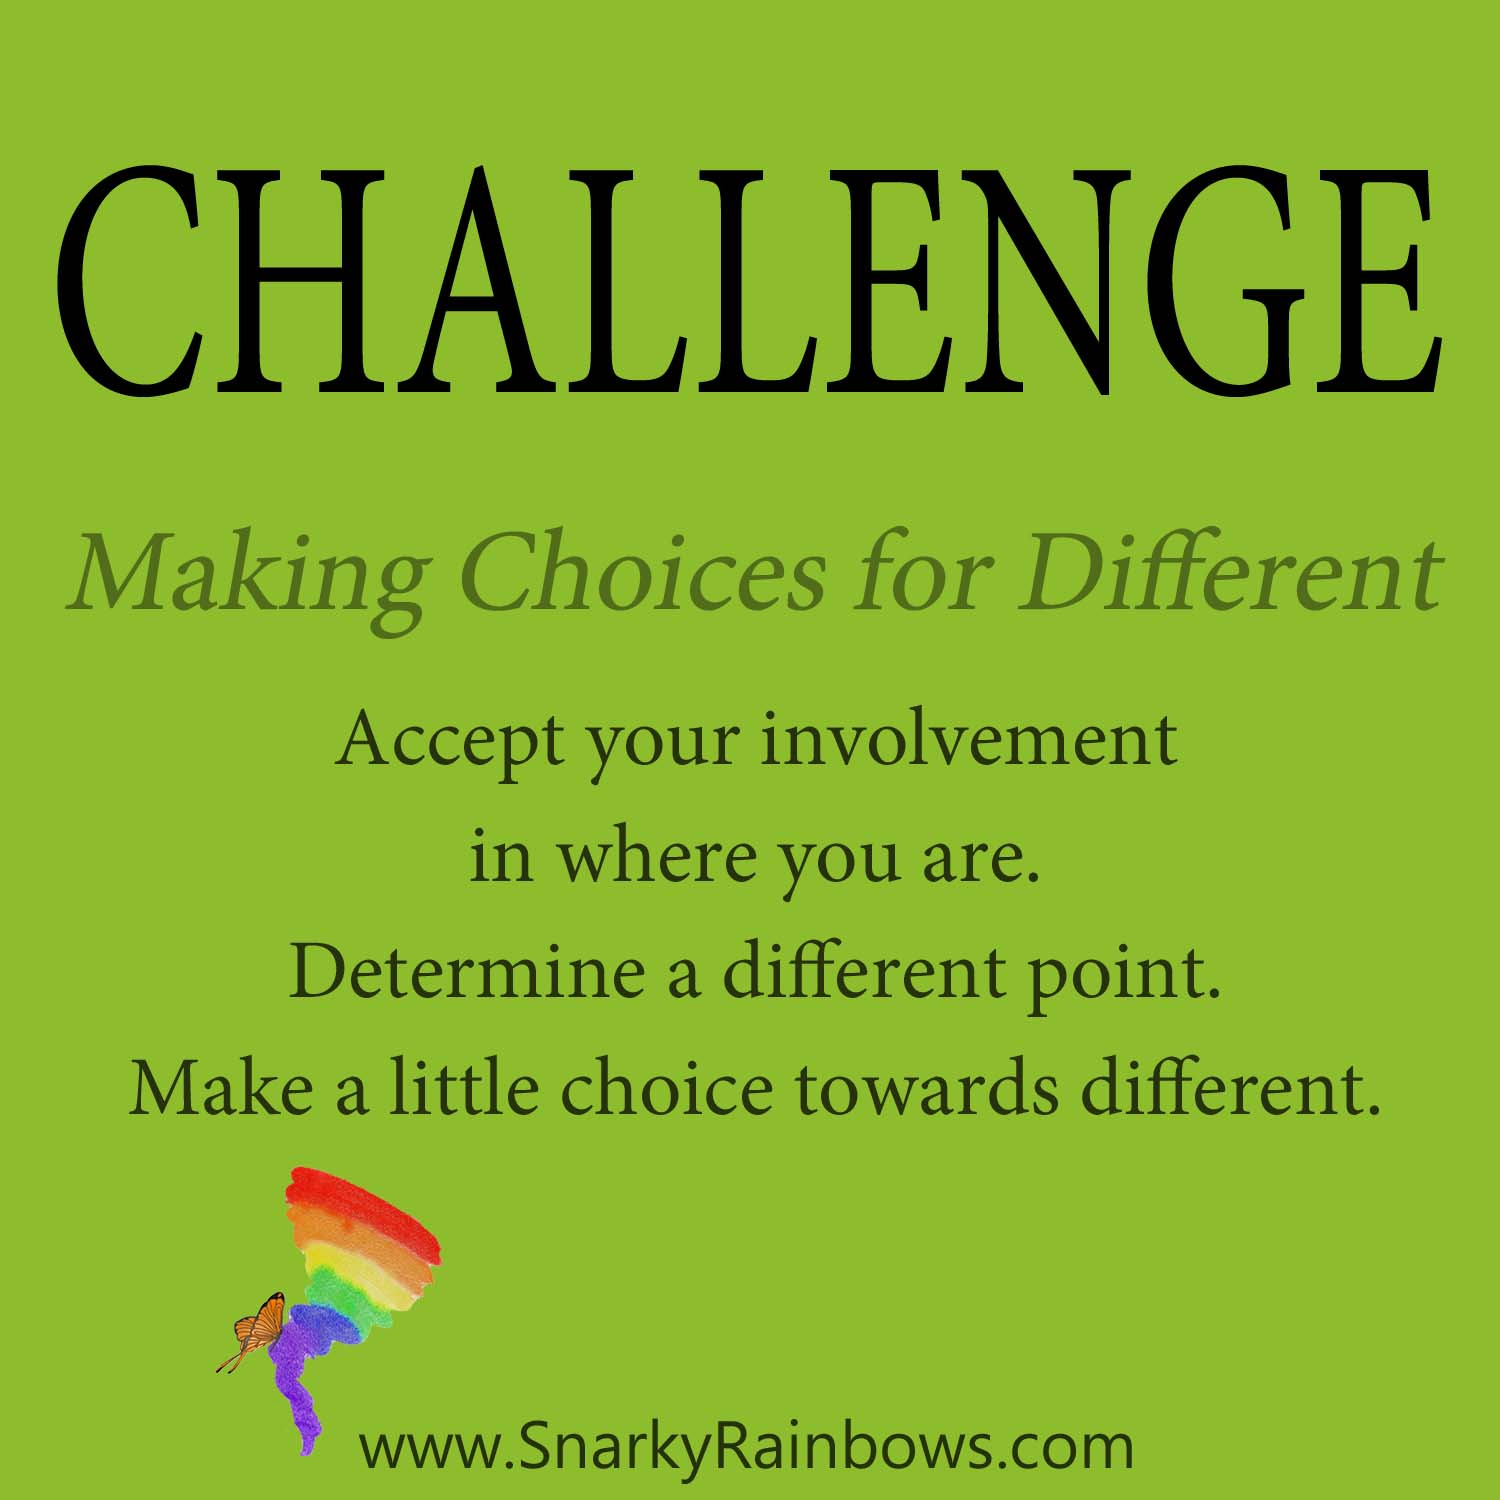 Daily Challenge - making the choices for different